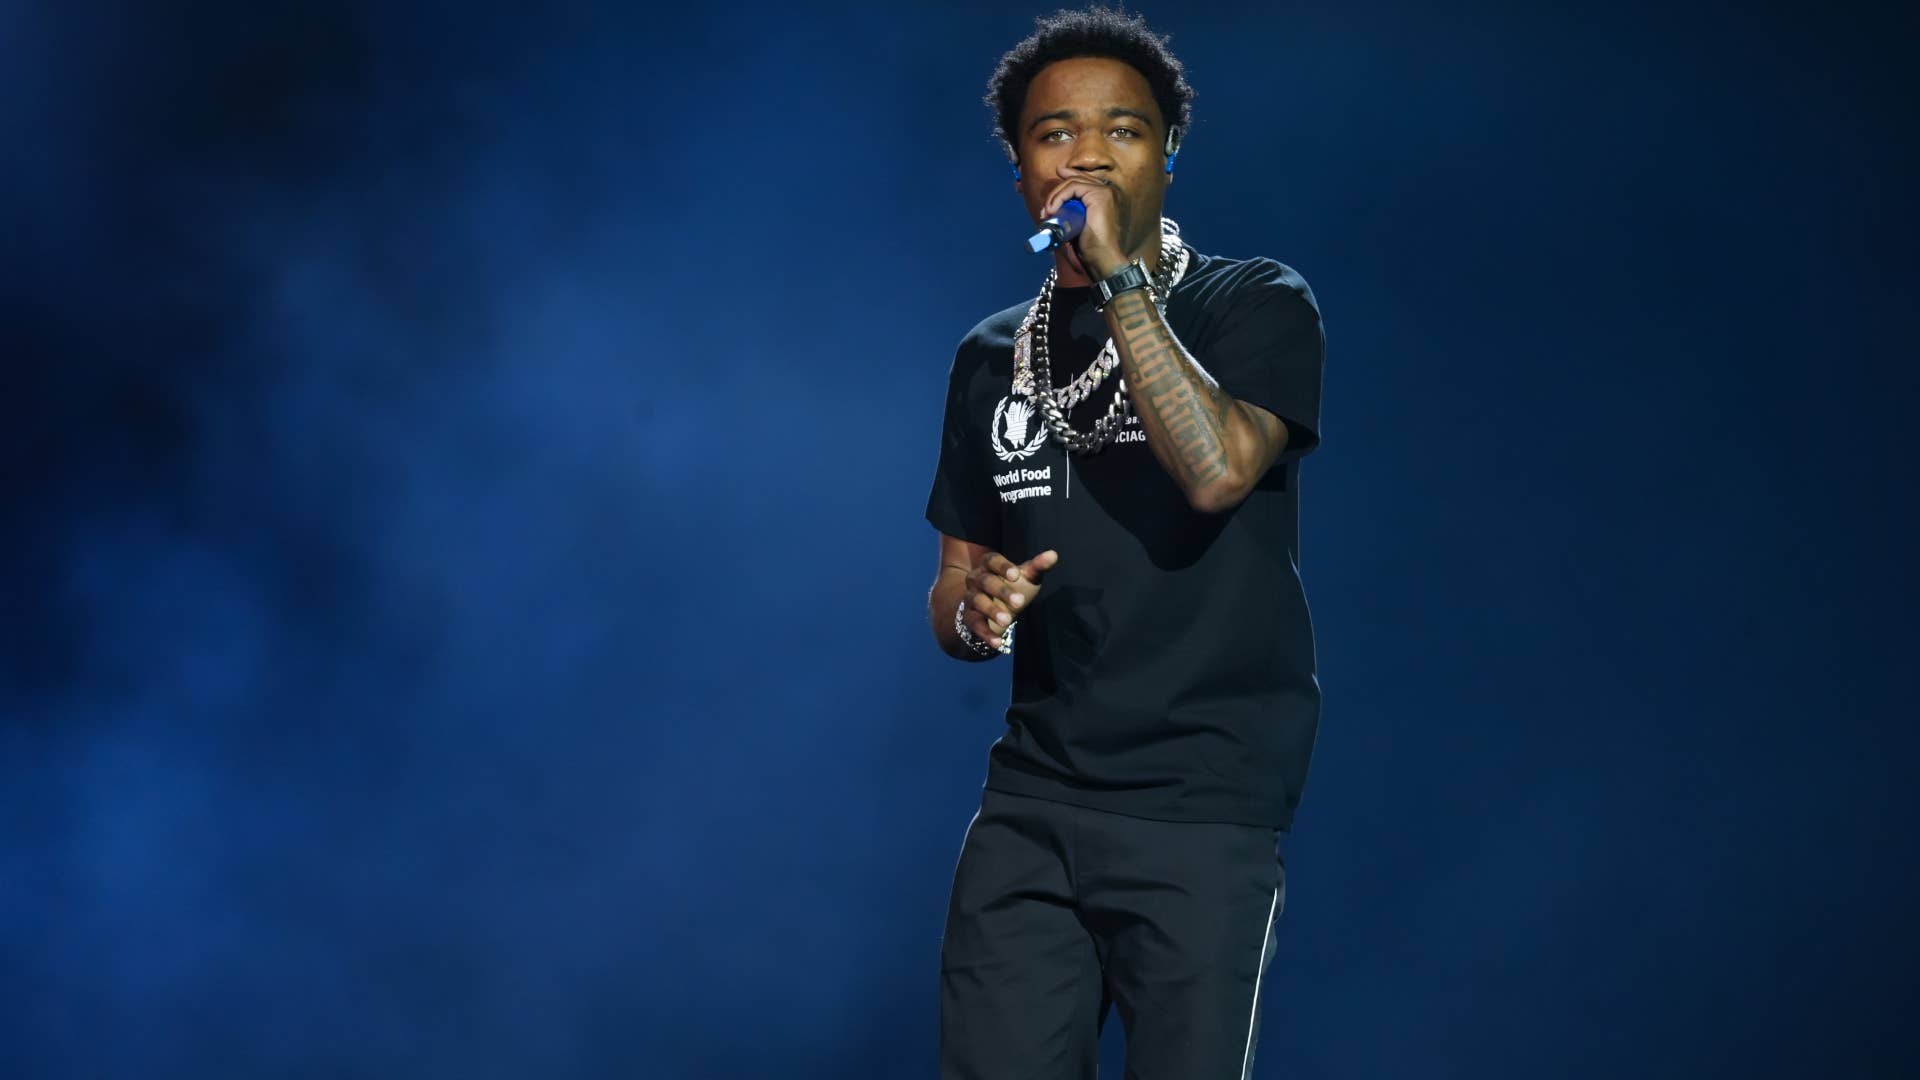 Roddy Ricch performs on stage during the Post Malone Twelve Carat Tour